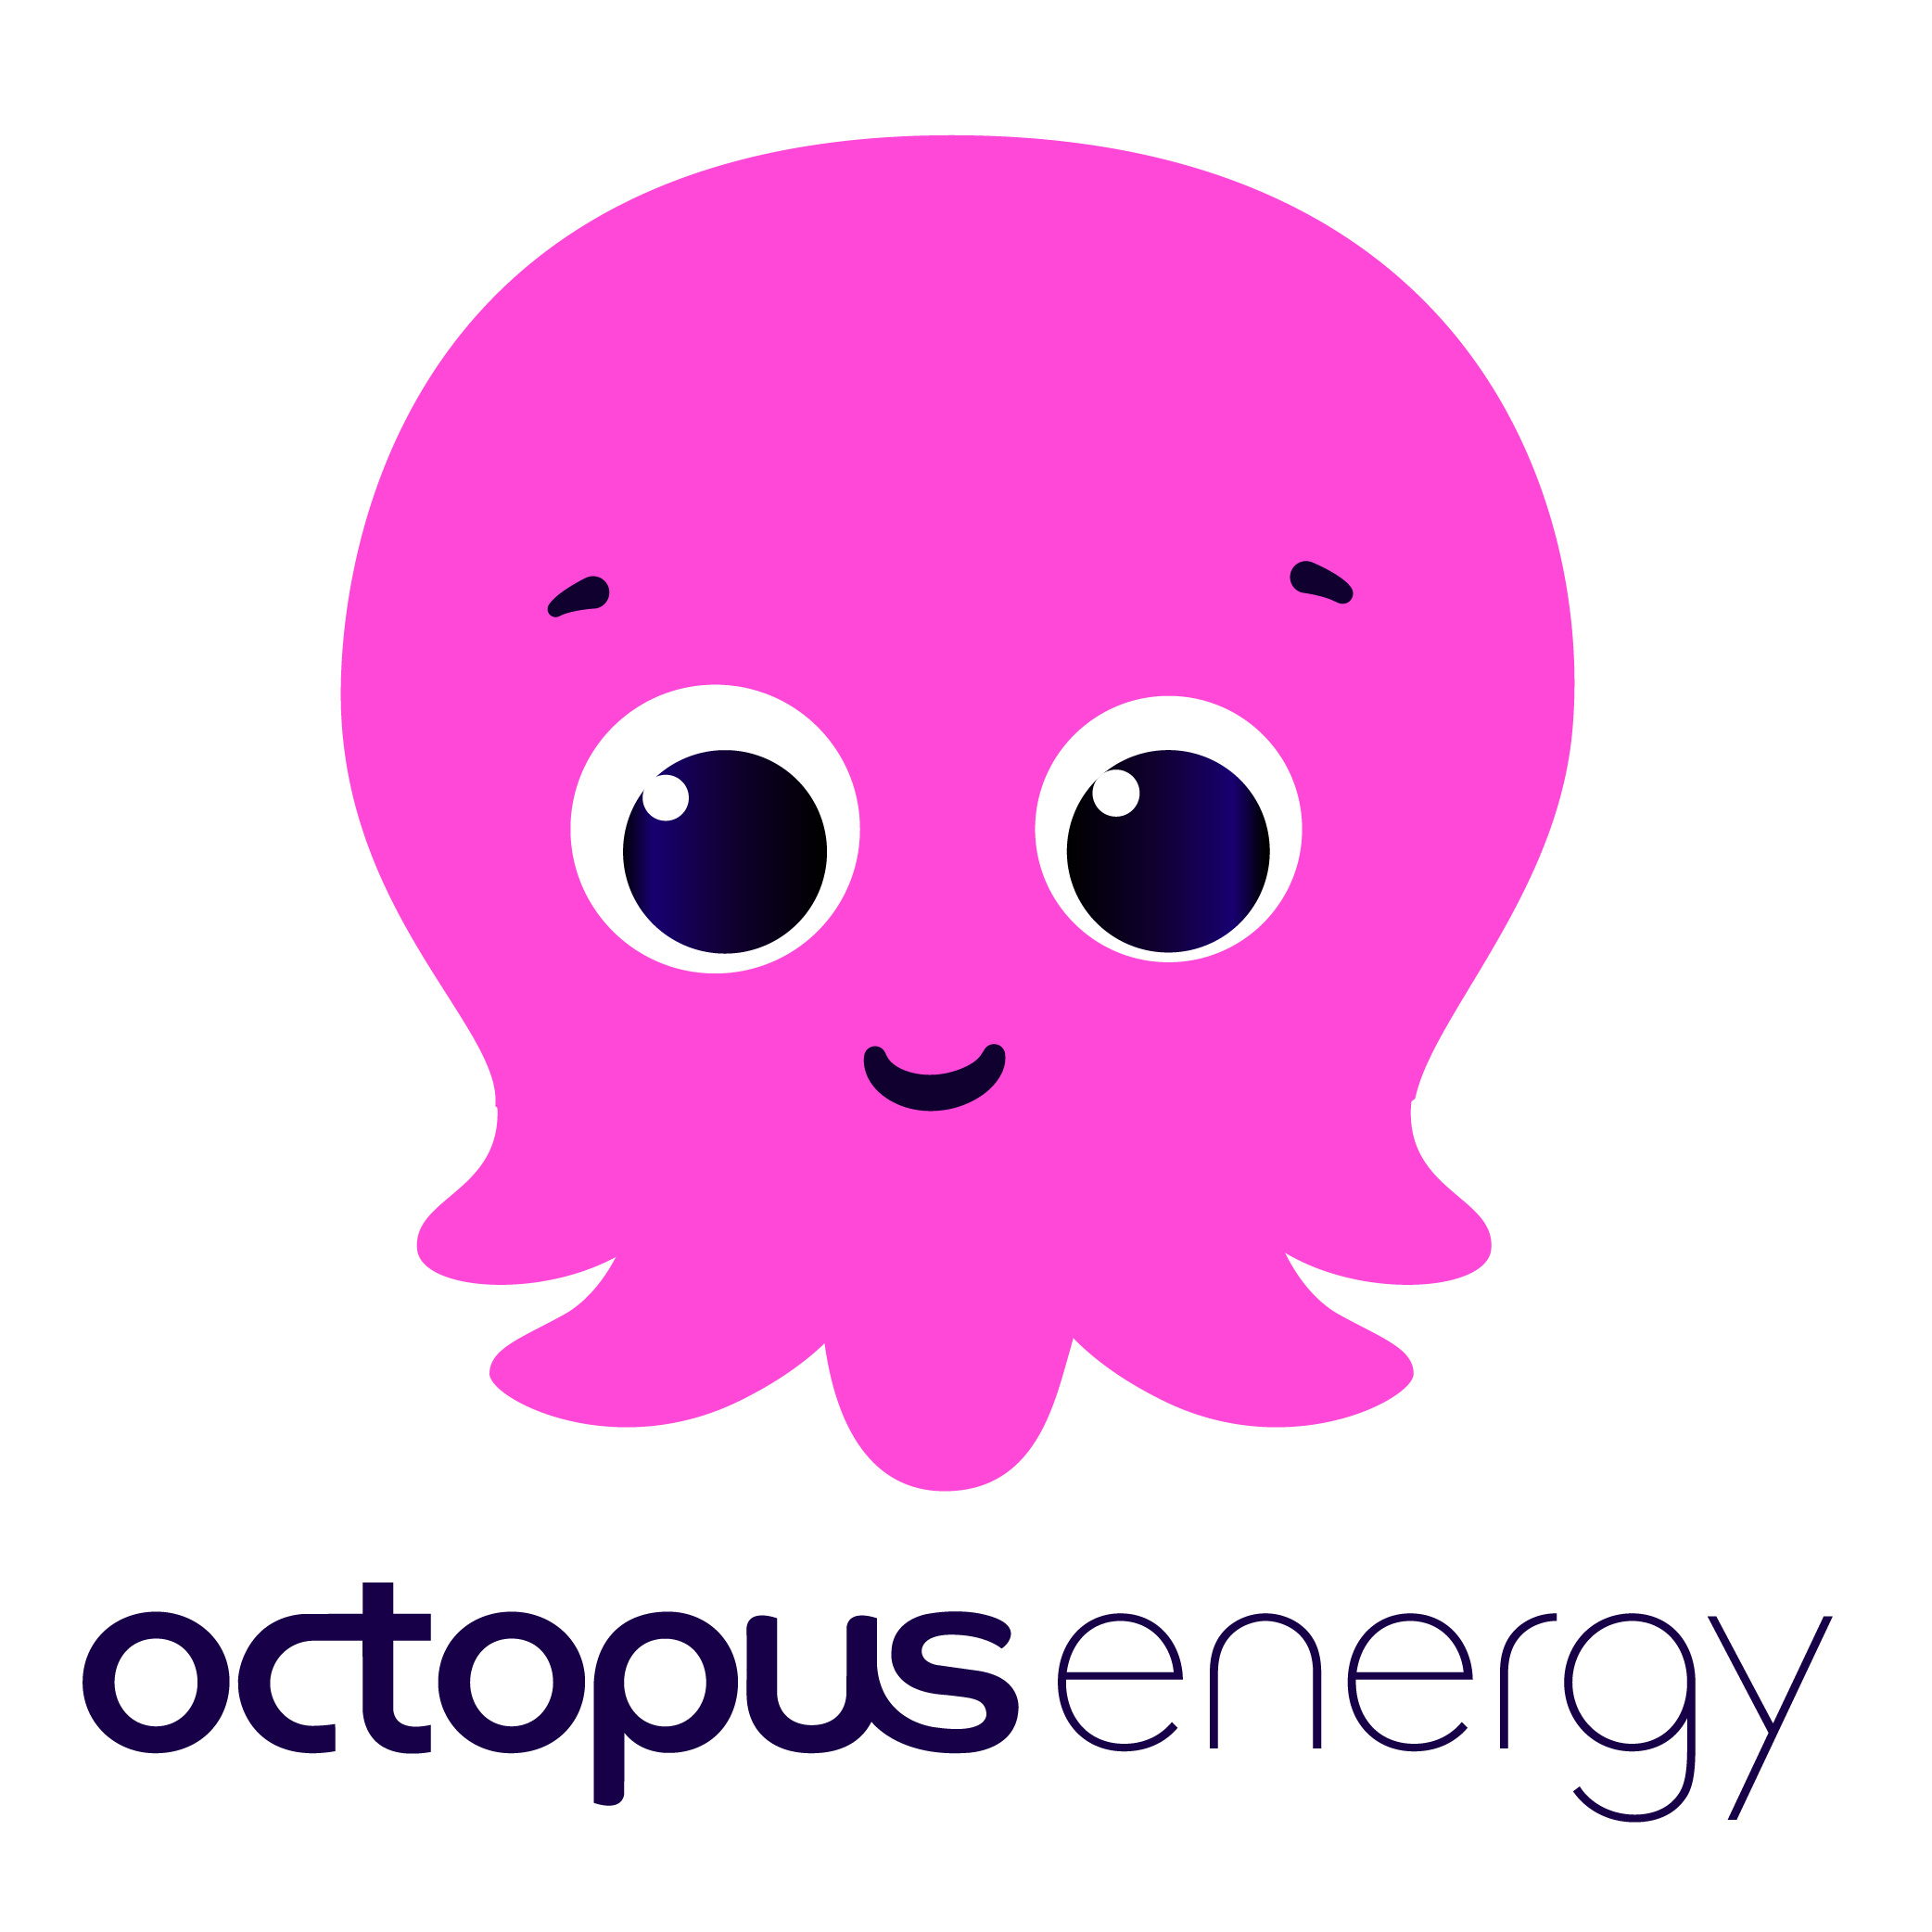 Octopus Energy Group